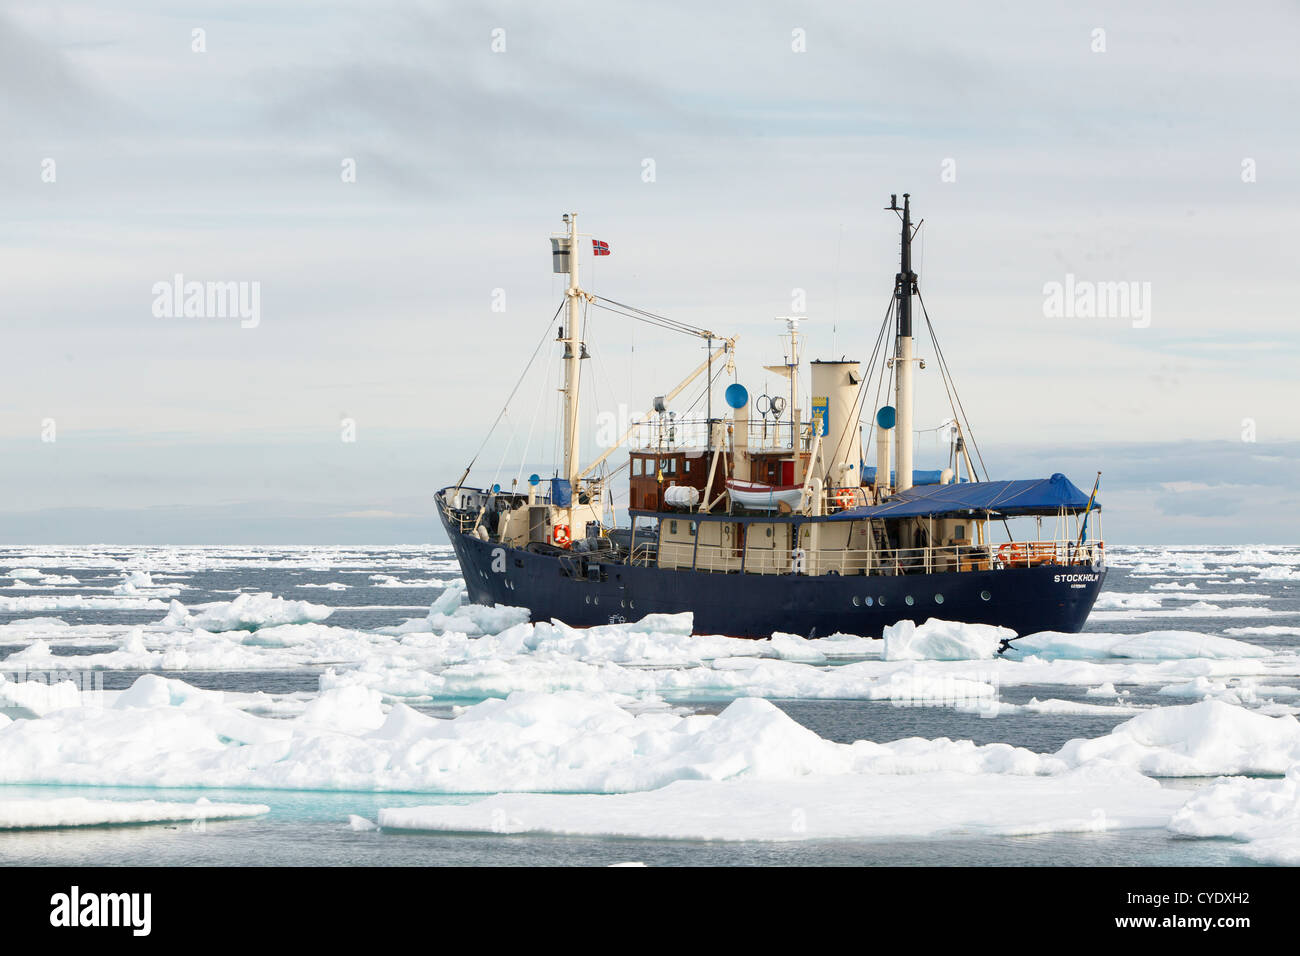 MS Stockholm expedition ship surrounded by ice in Svalbard island, Barents Sea, Norway. Stock Photo